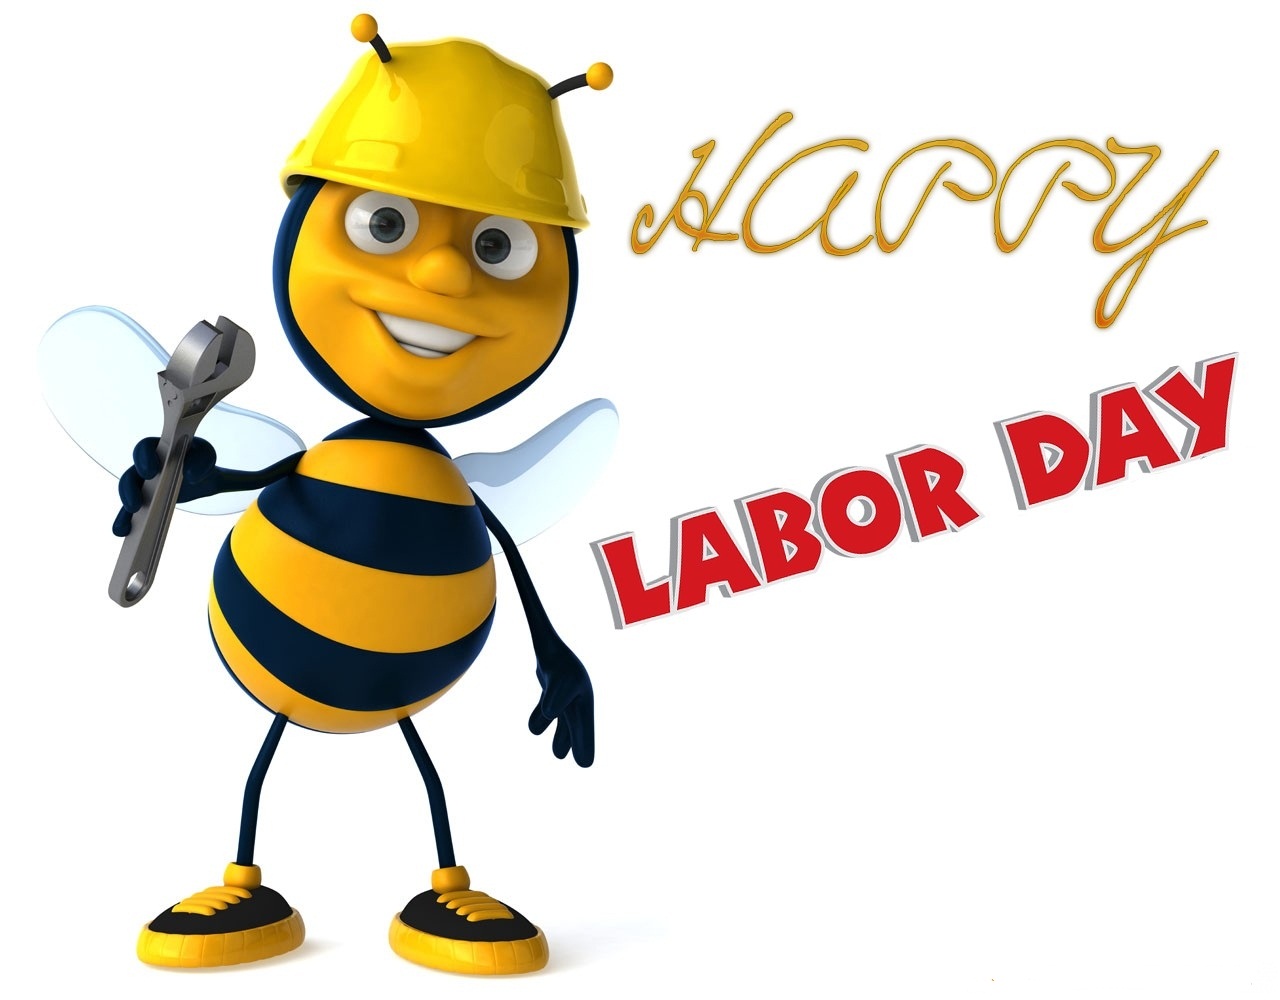 Clip Arts Related To : worker labor day clipart. 